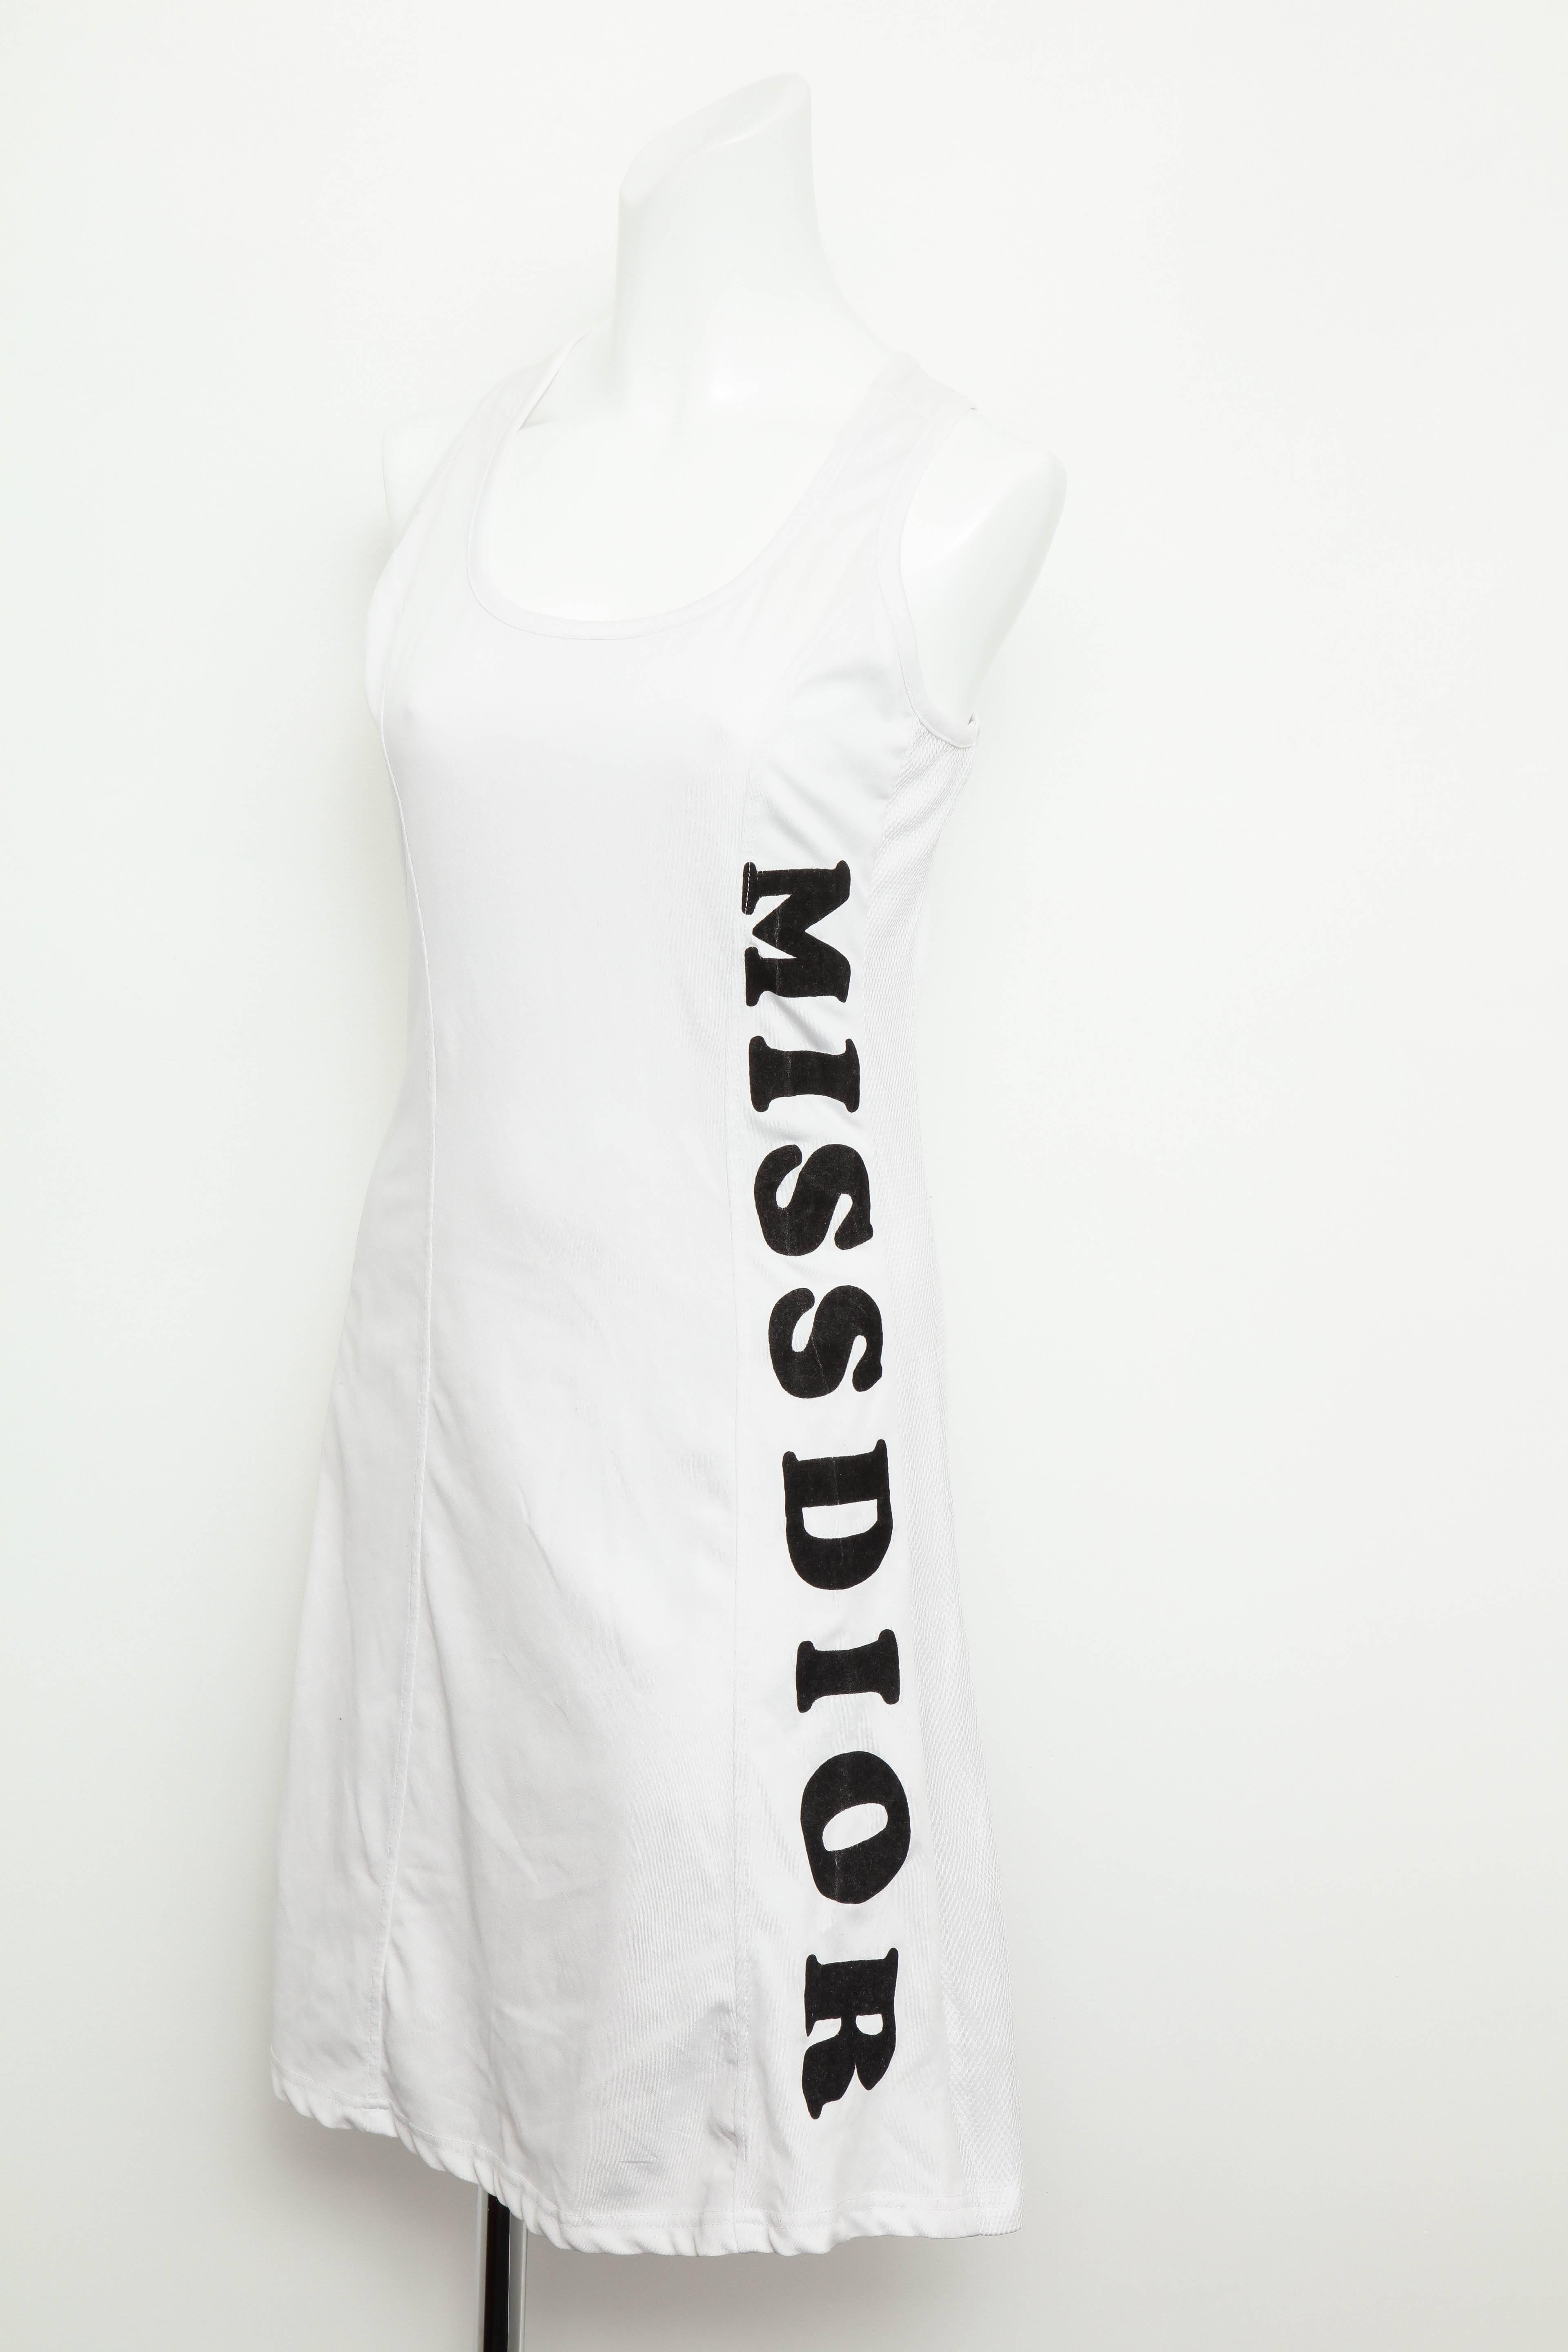 Very rare Christian Dior white dress by John Galliano with Miss Dior logo in black. 

Size FR 38.